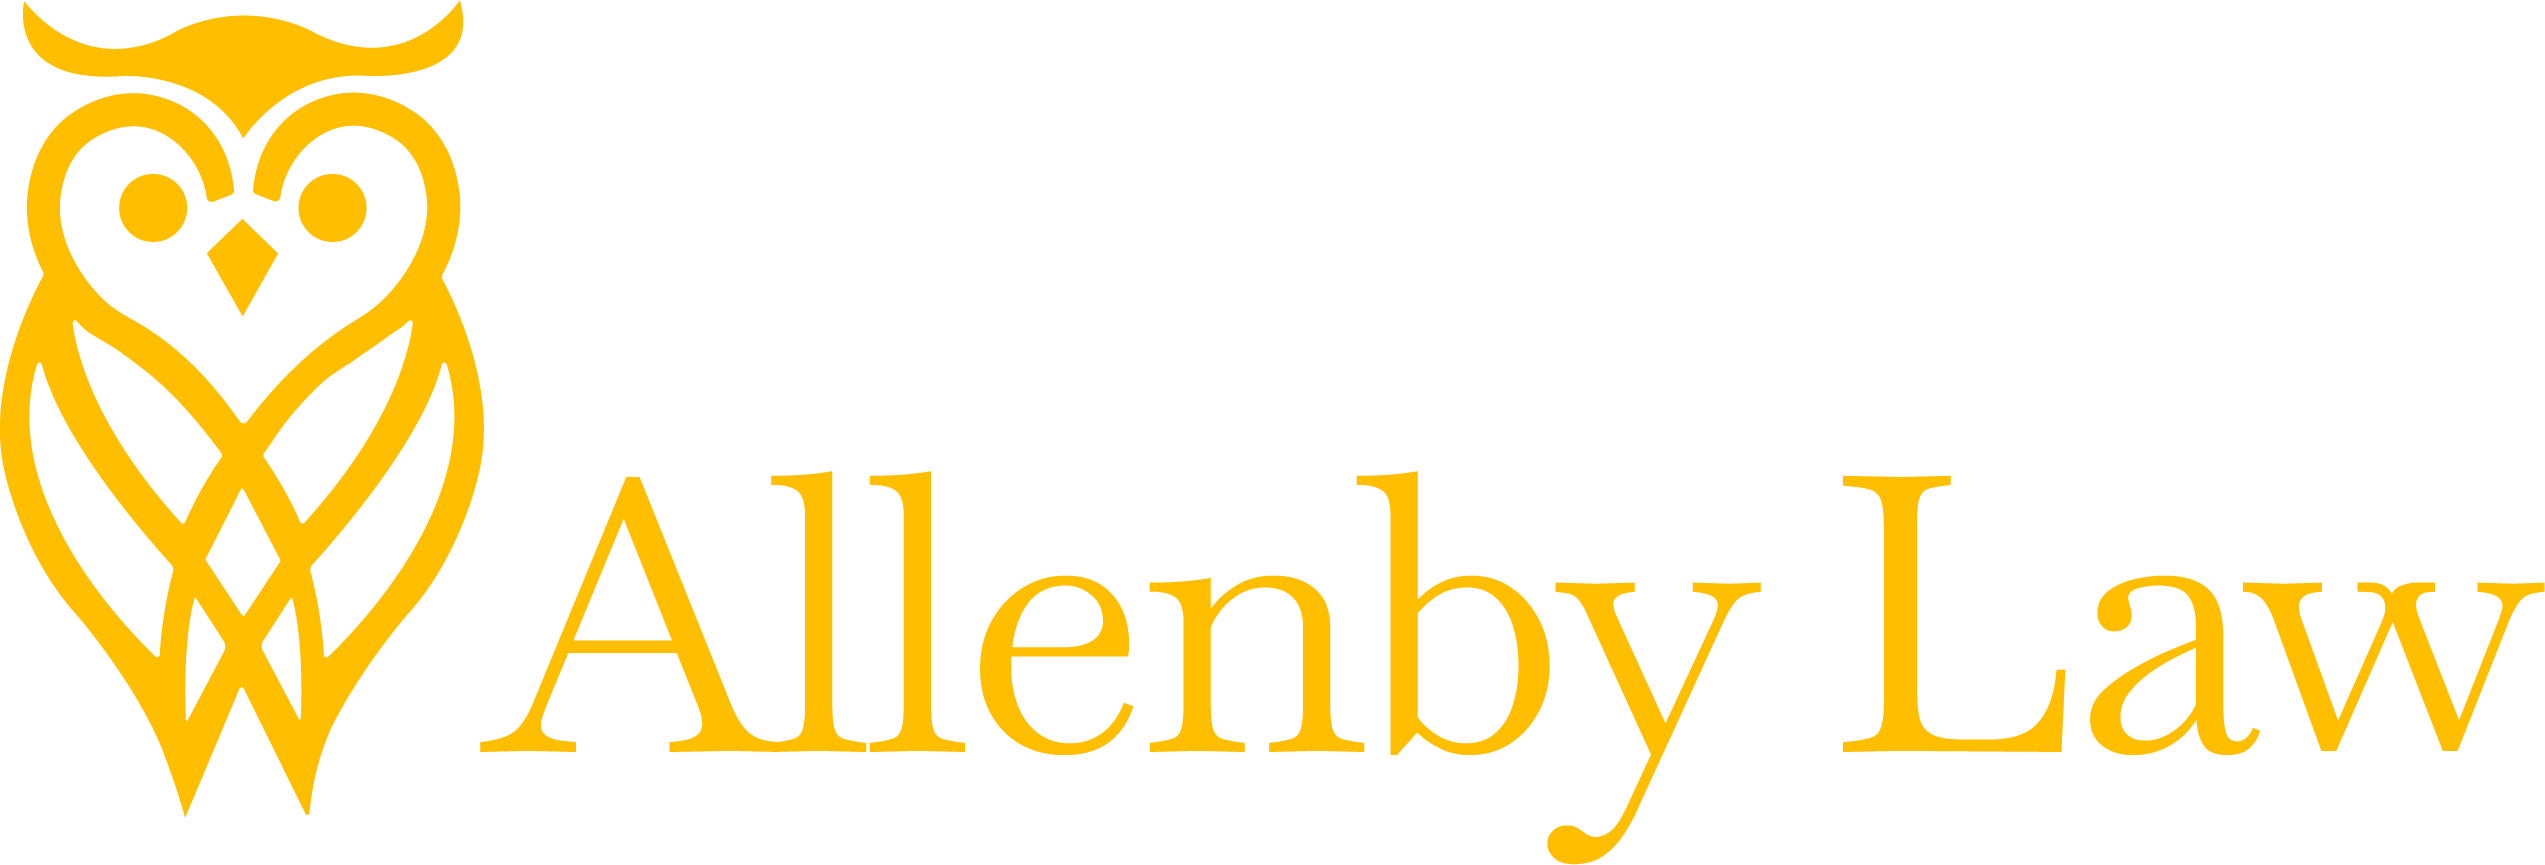 Allenby Law San Diego - Smart Estate Planning for Peace of Mind